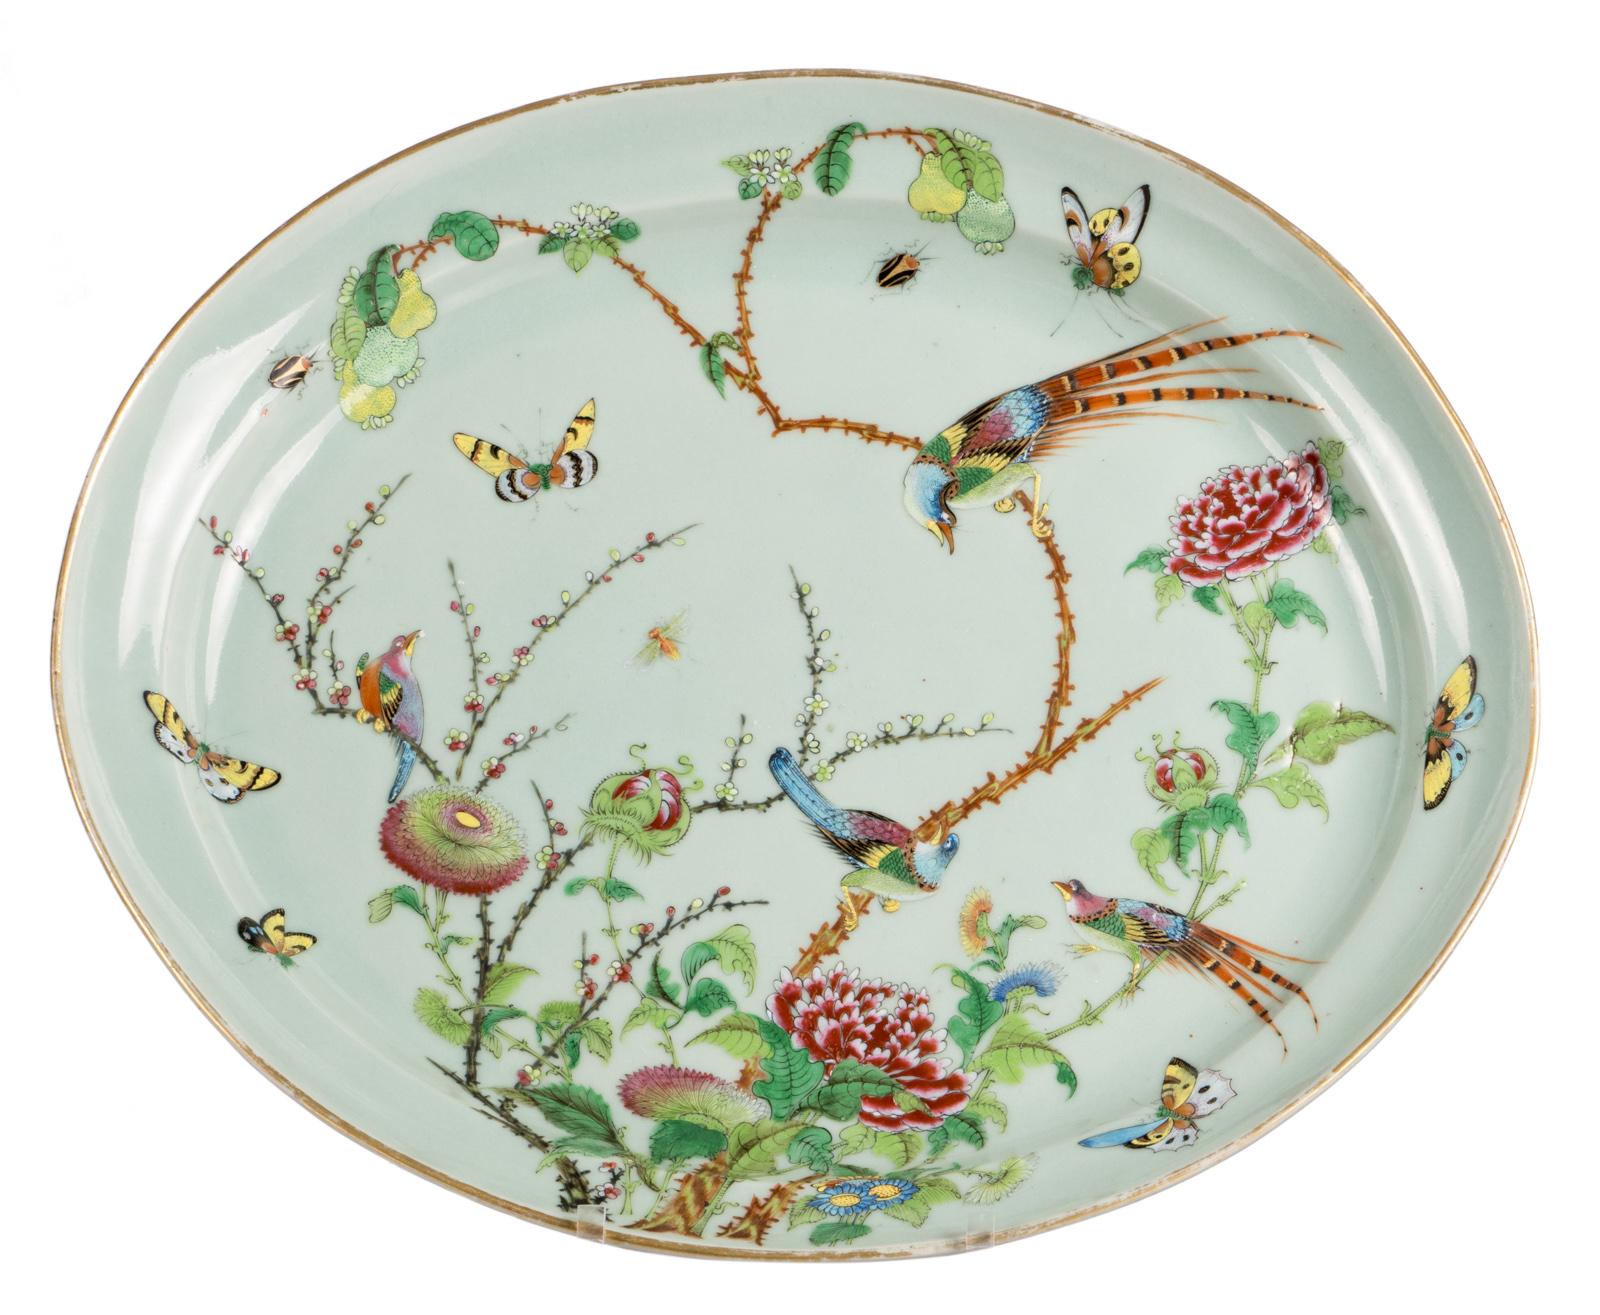 A Chinese oval celadon ground famille rose decorated plate with birds on flower branches and